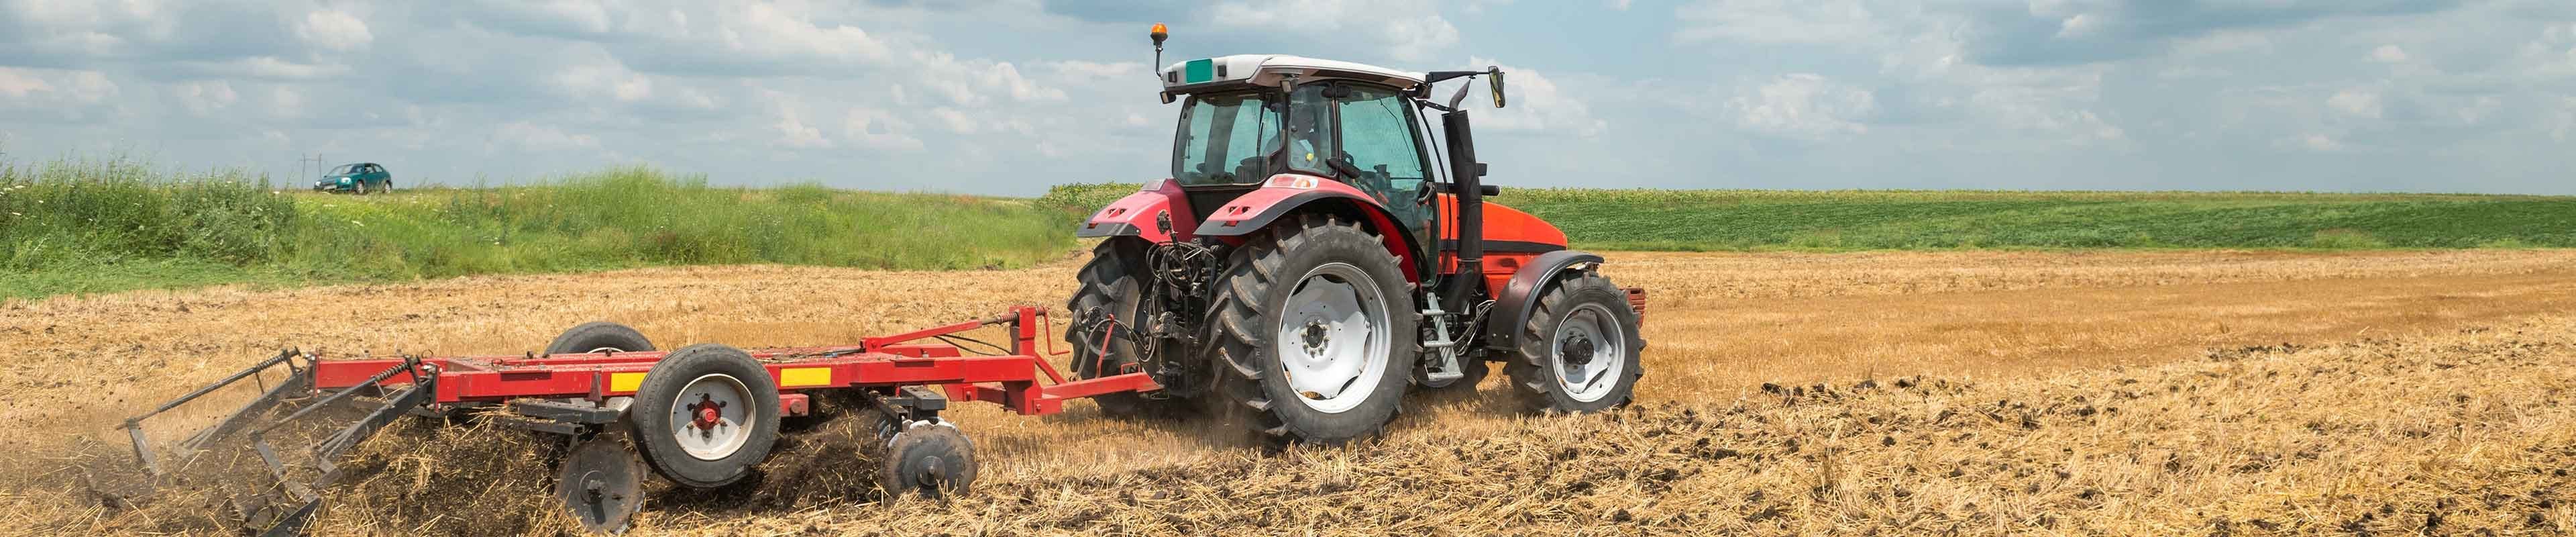 Image of a tractor safely tilling a field.